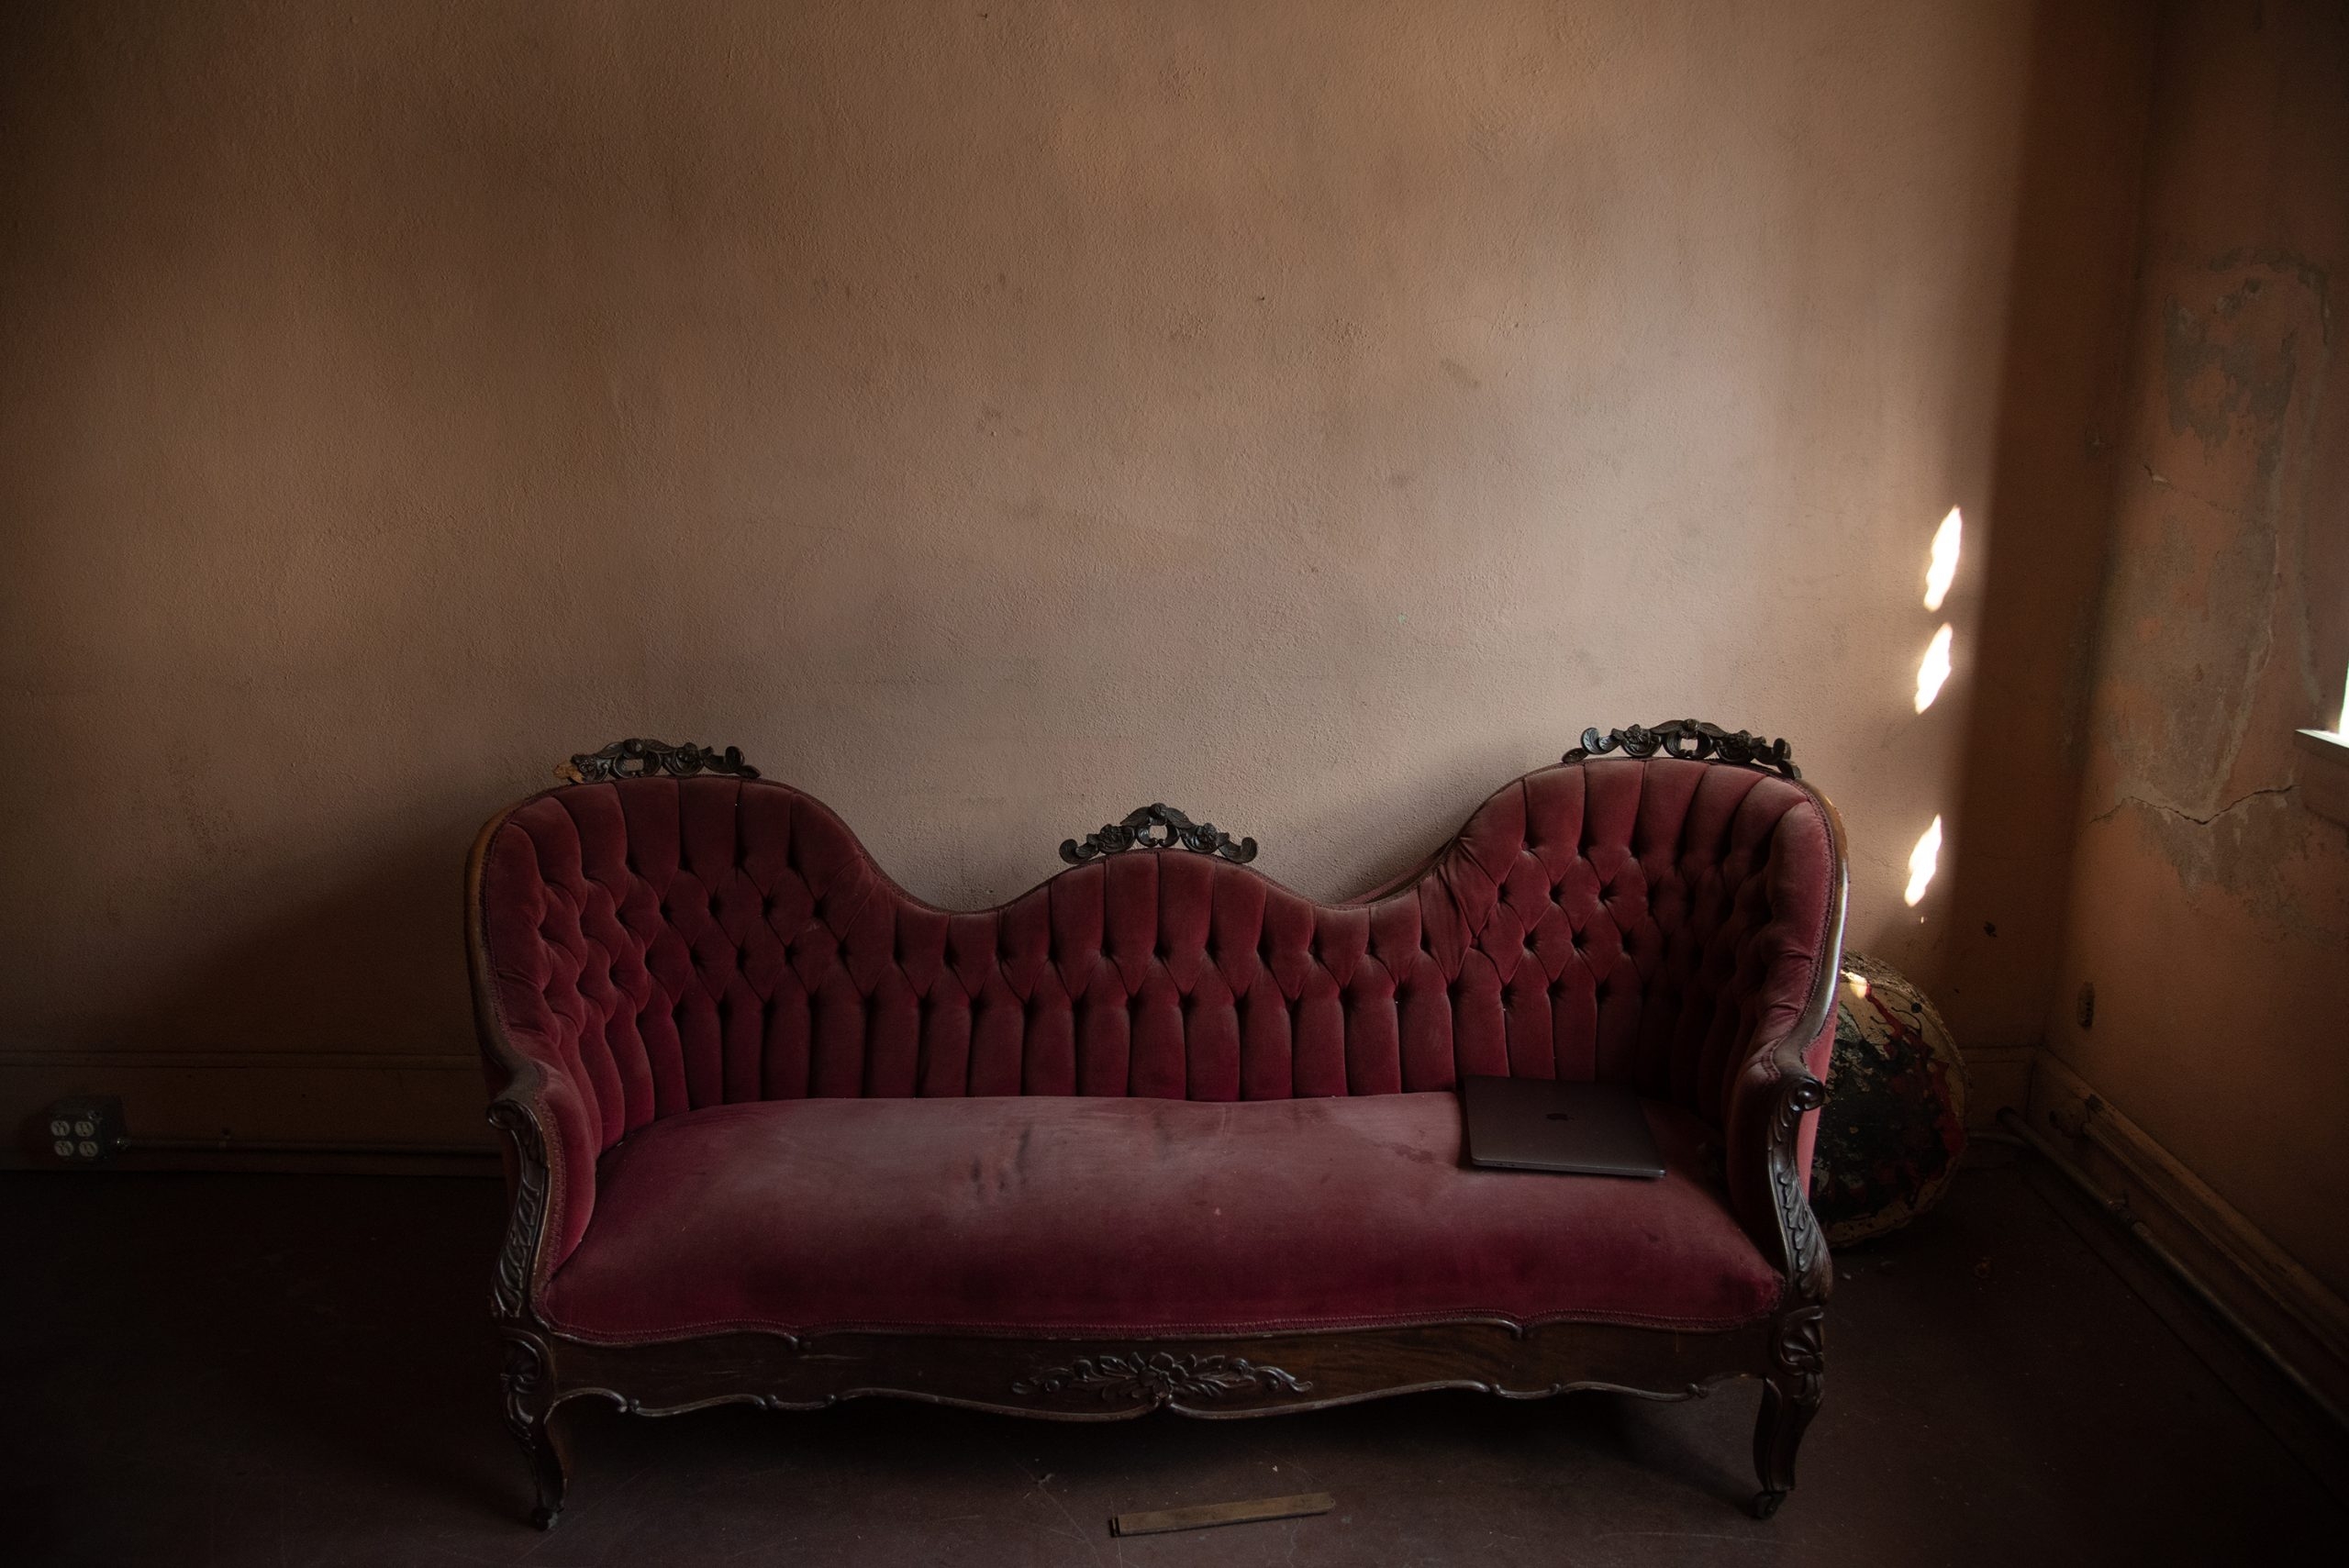 The Burgundy Couch